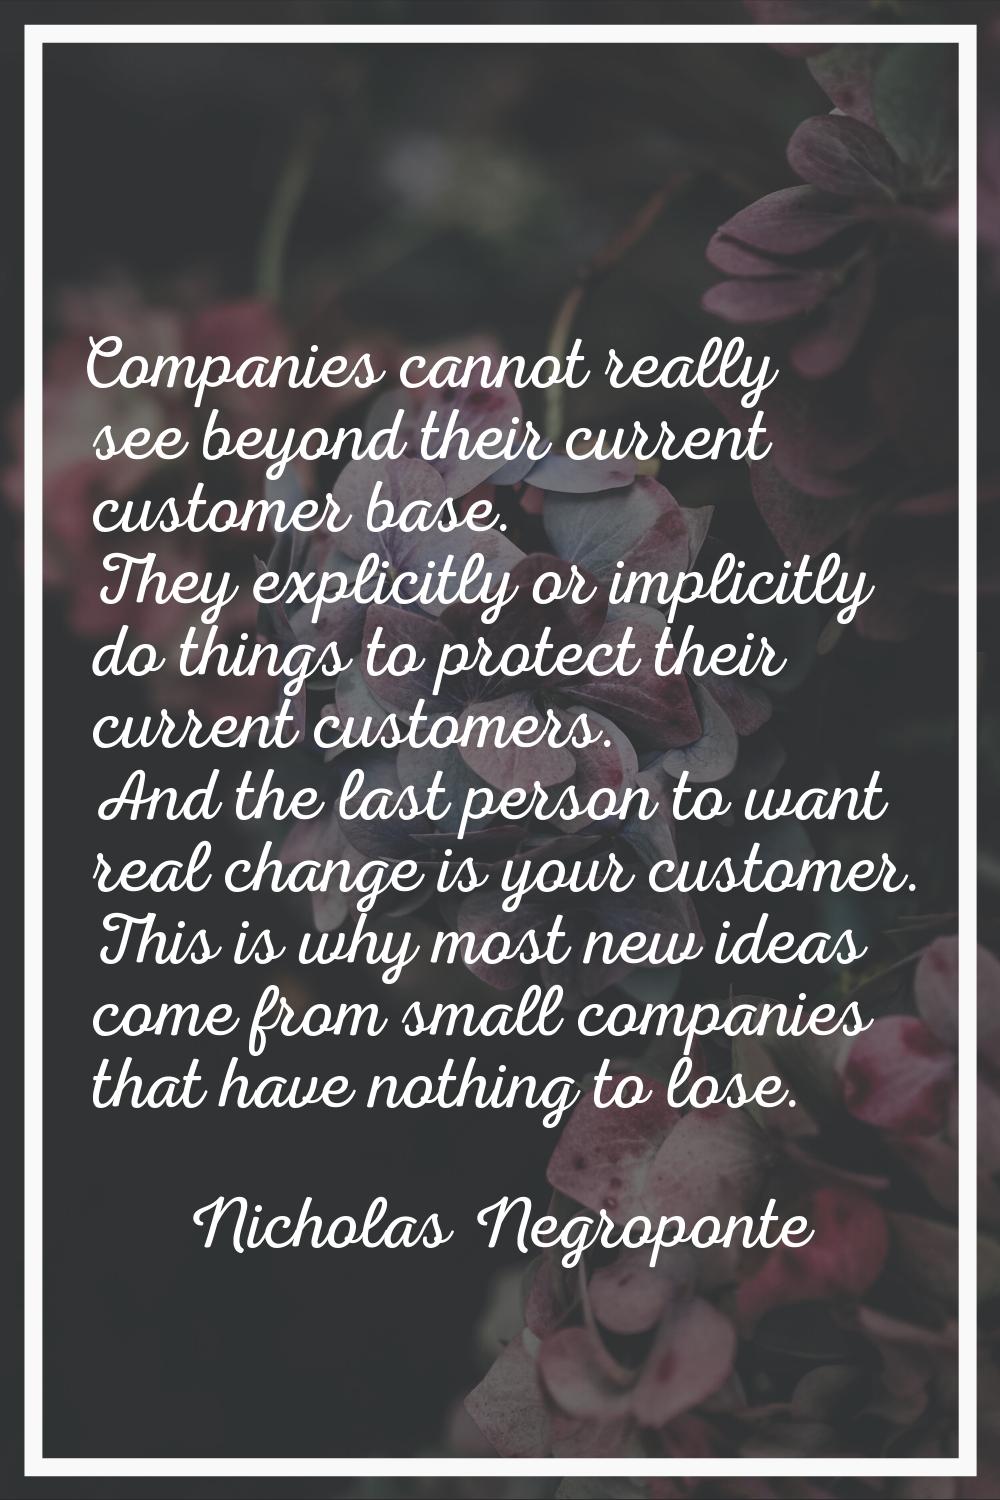 Companies cannot really see beyond their current customer base. They explicitly or implicitly do th